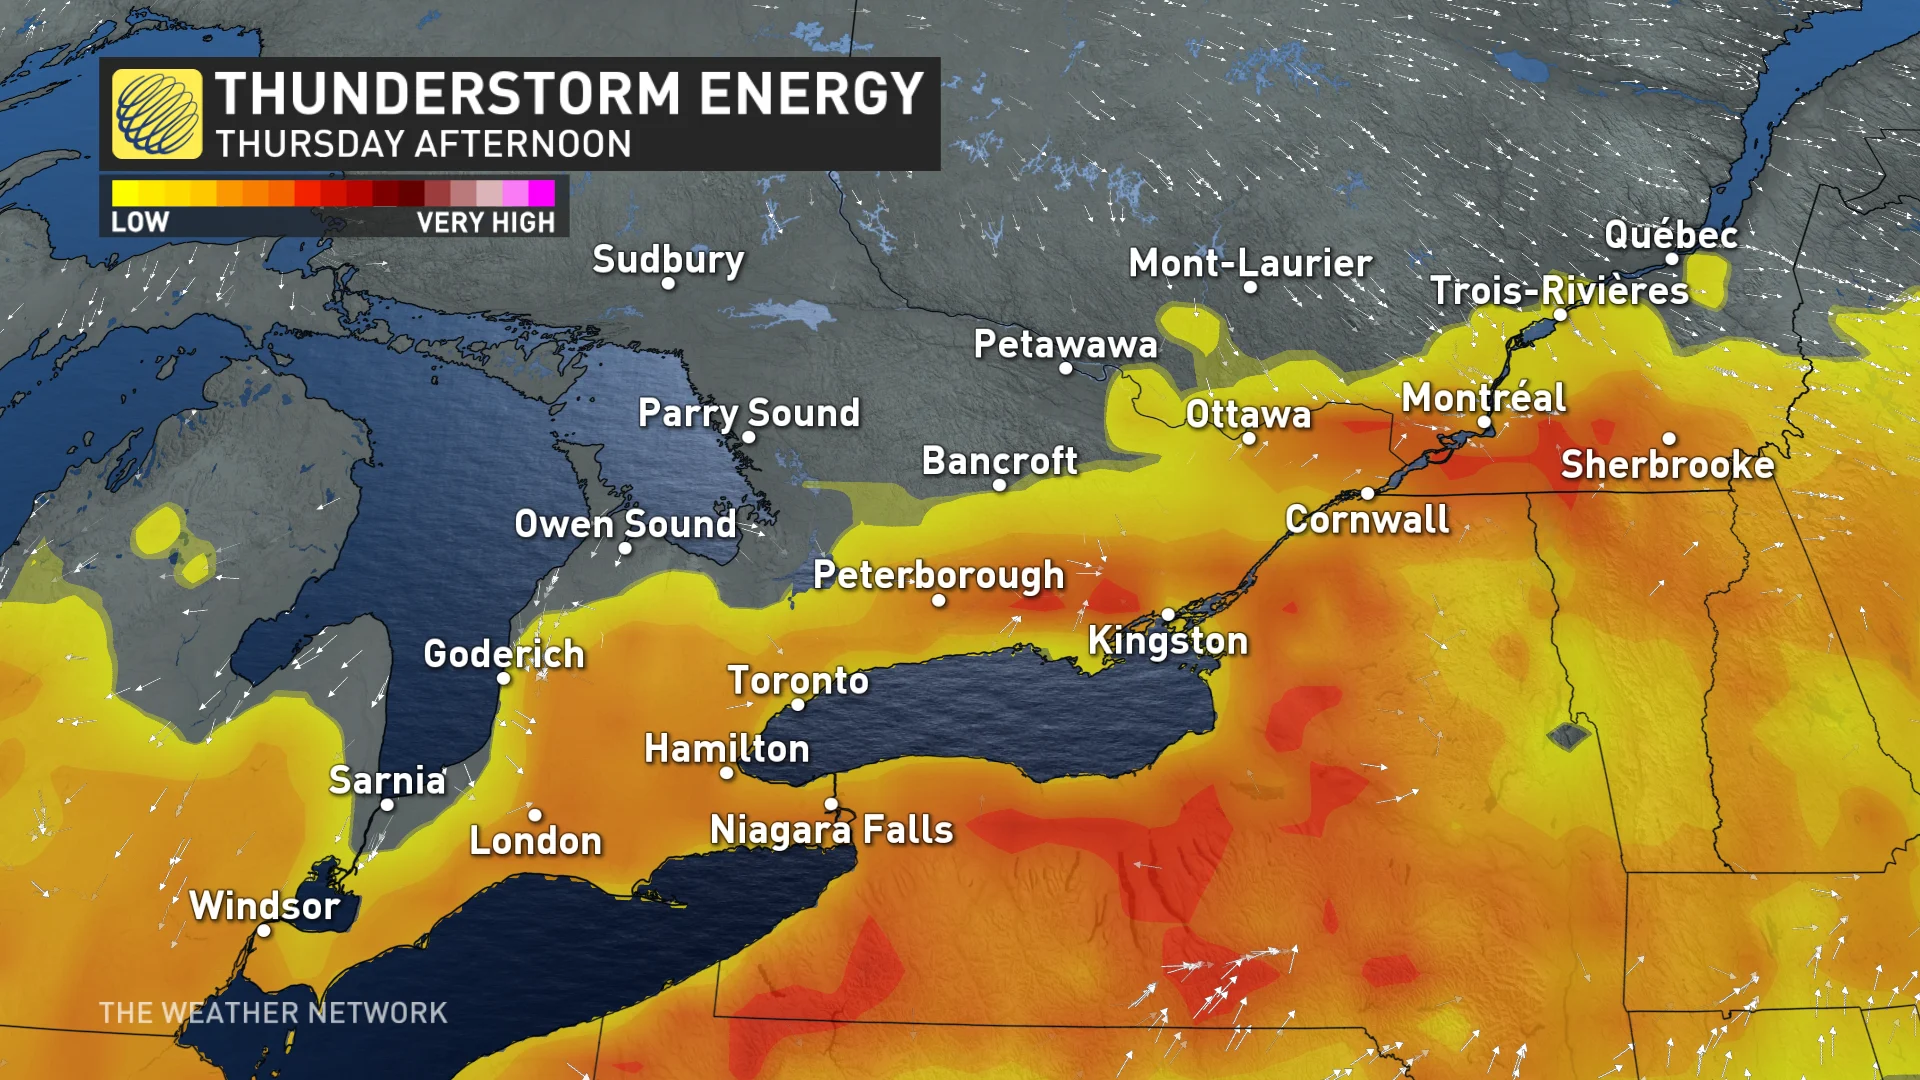 Baron - Thunderstorm energy Thursday afternoon Ontario - June20